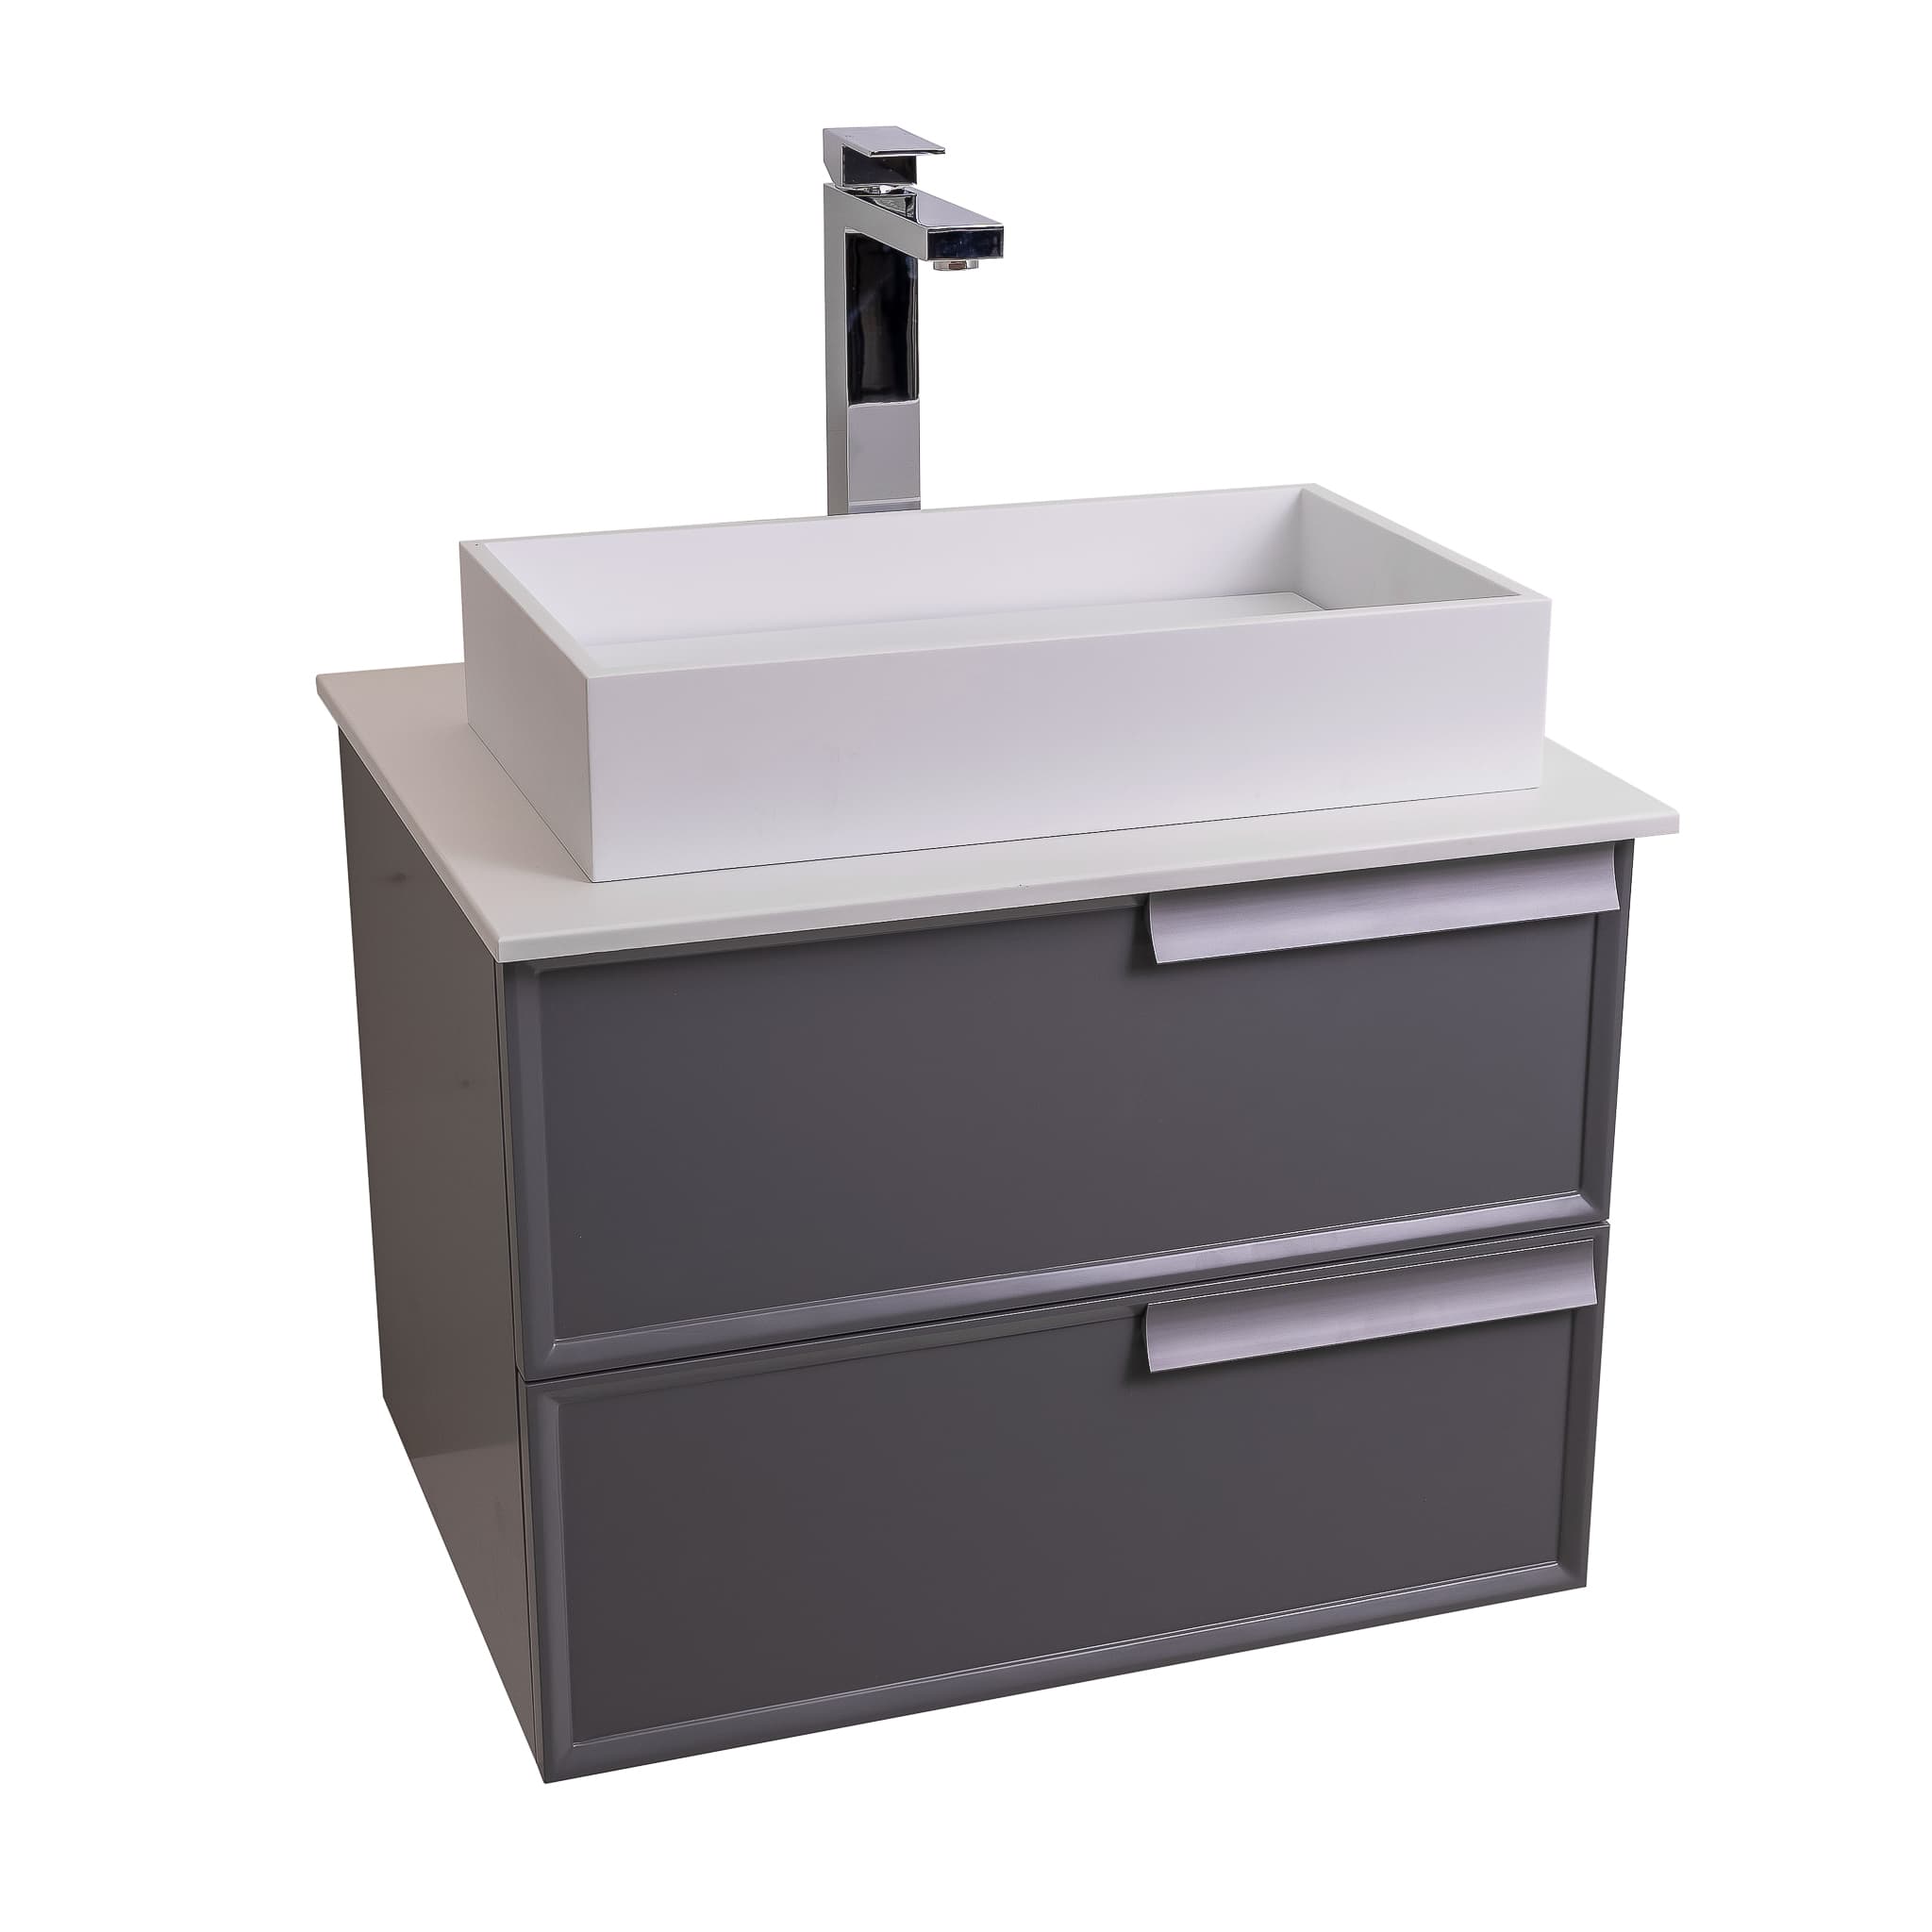 Garda 23.5 Matte Grey Cabinet, Solid Surface Flat White Counter and Infinity Square Solid Surface White Basin 1329, Wall Mounted Modern Vanity Set